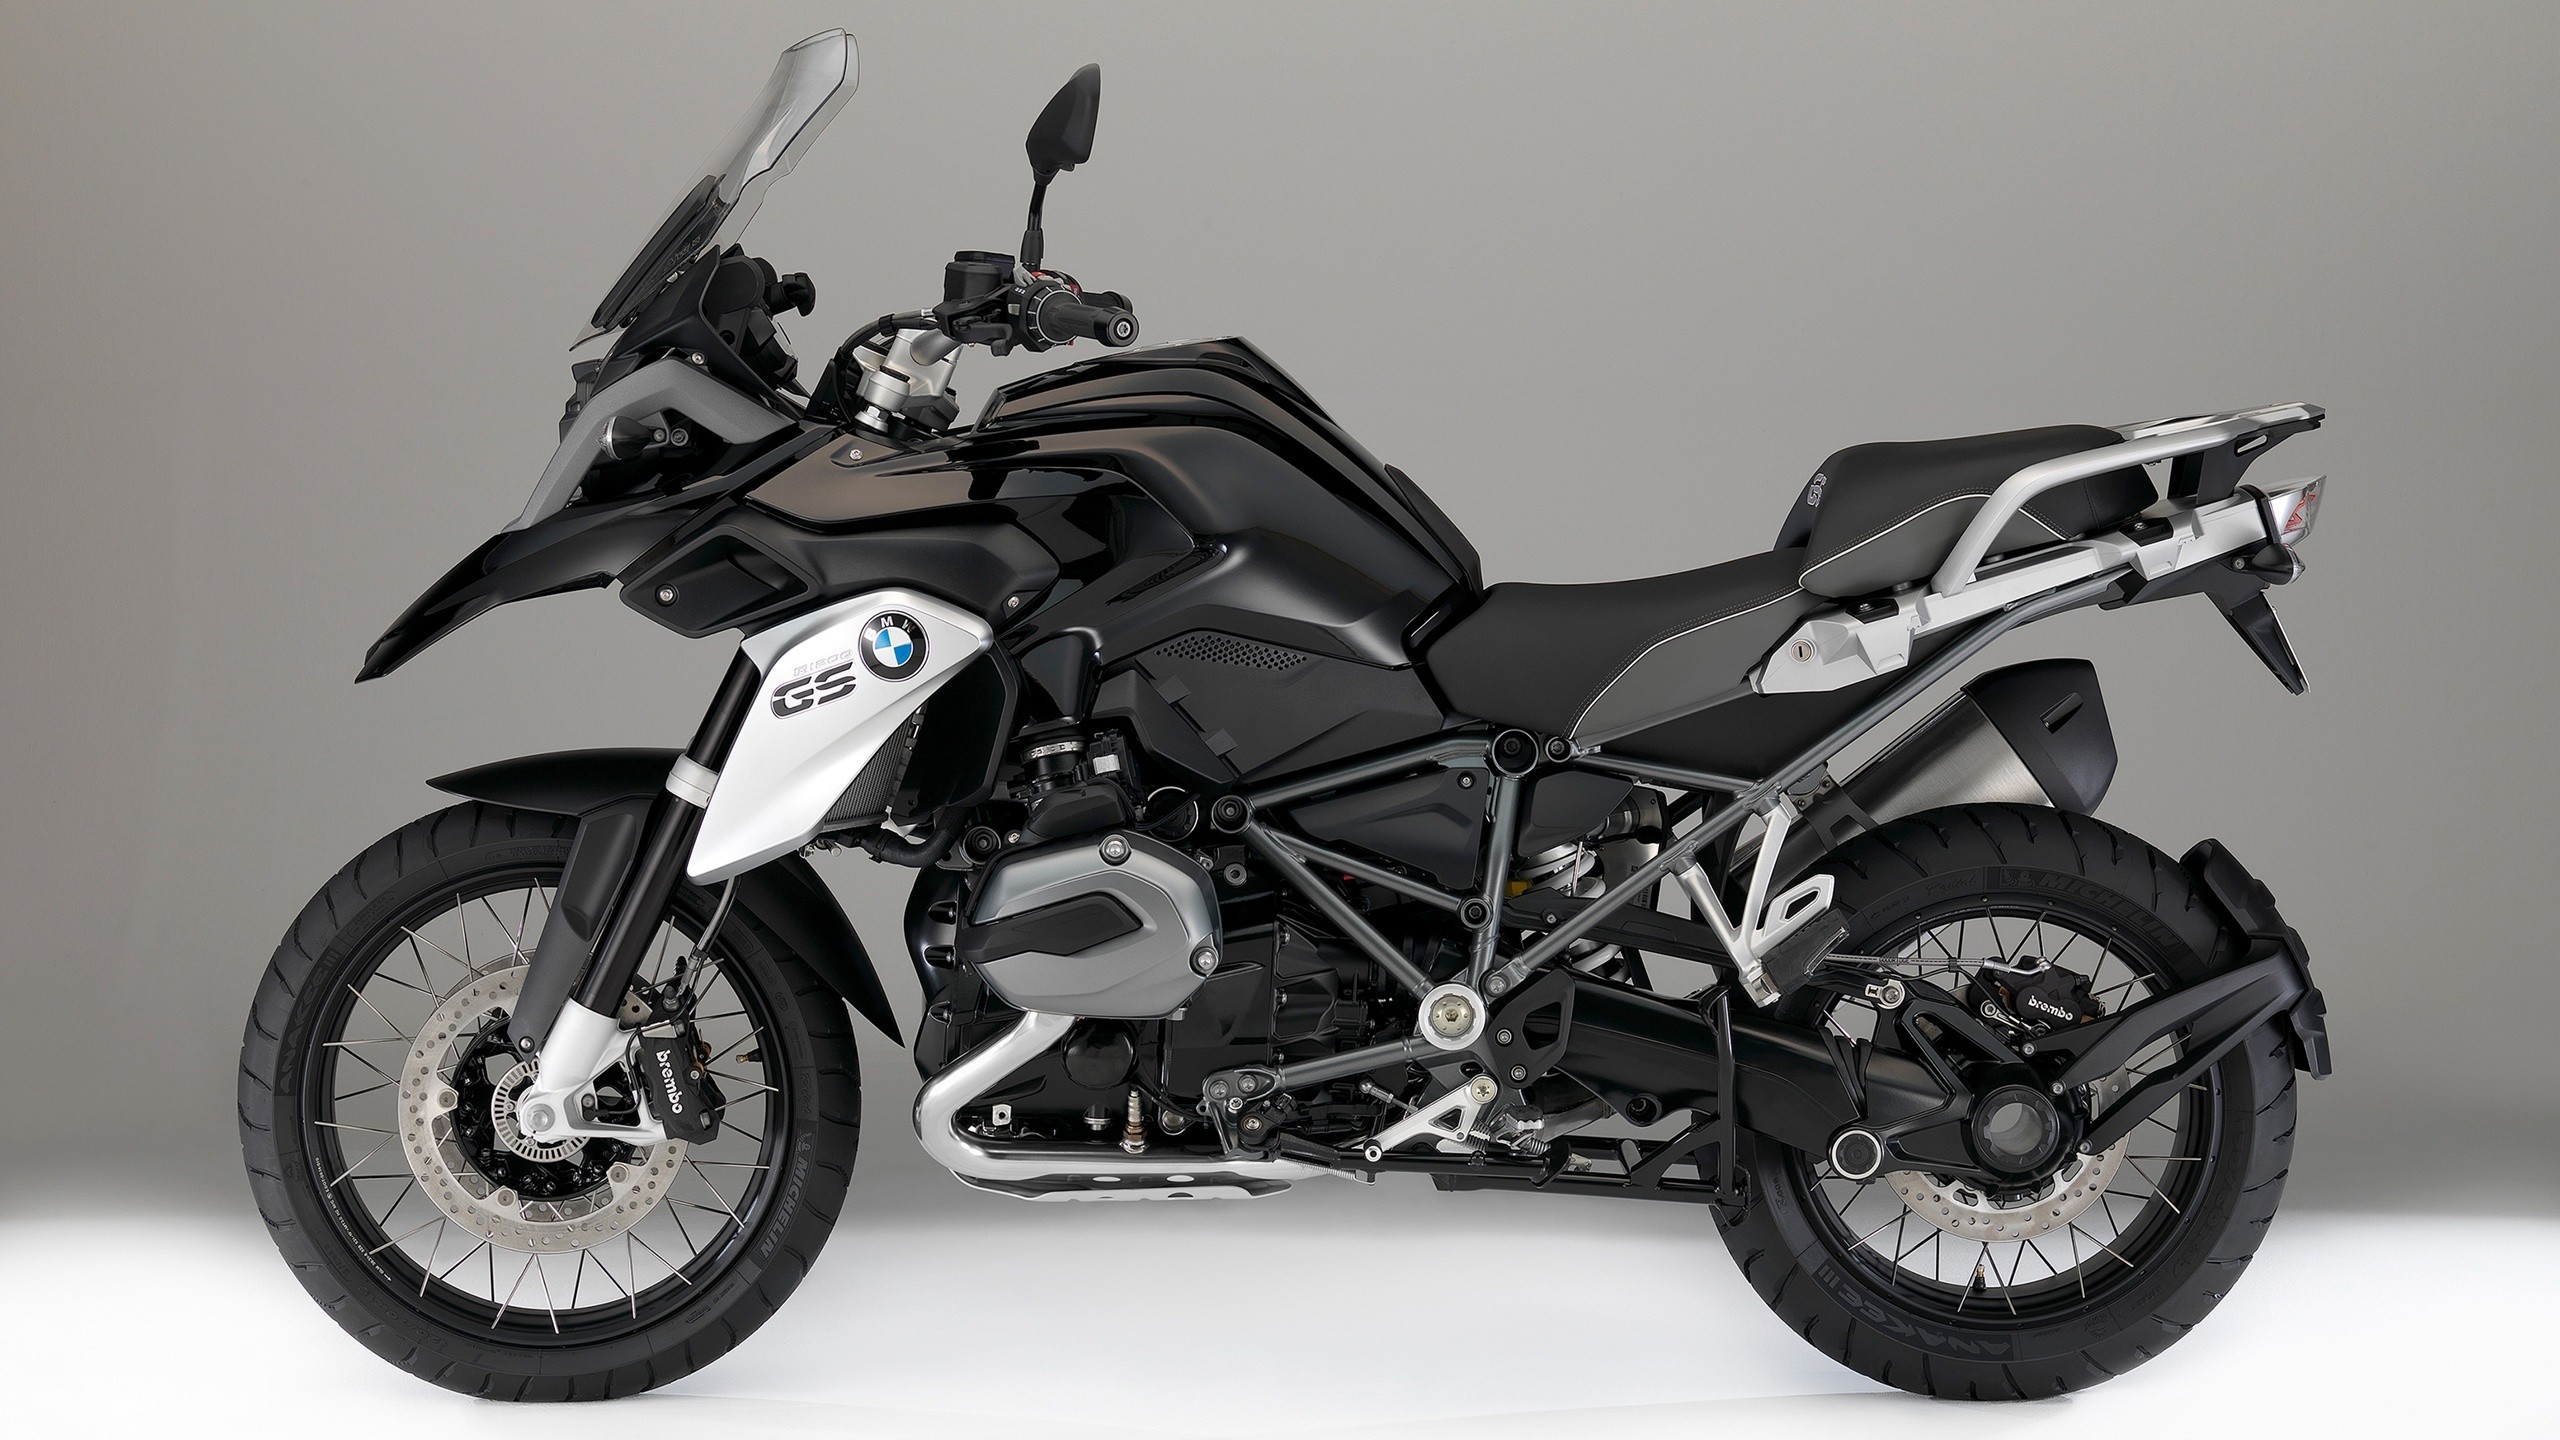 Wallpapers BMW GS 200 car motorcycle on the desktop